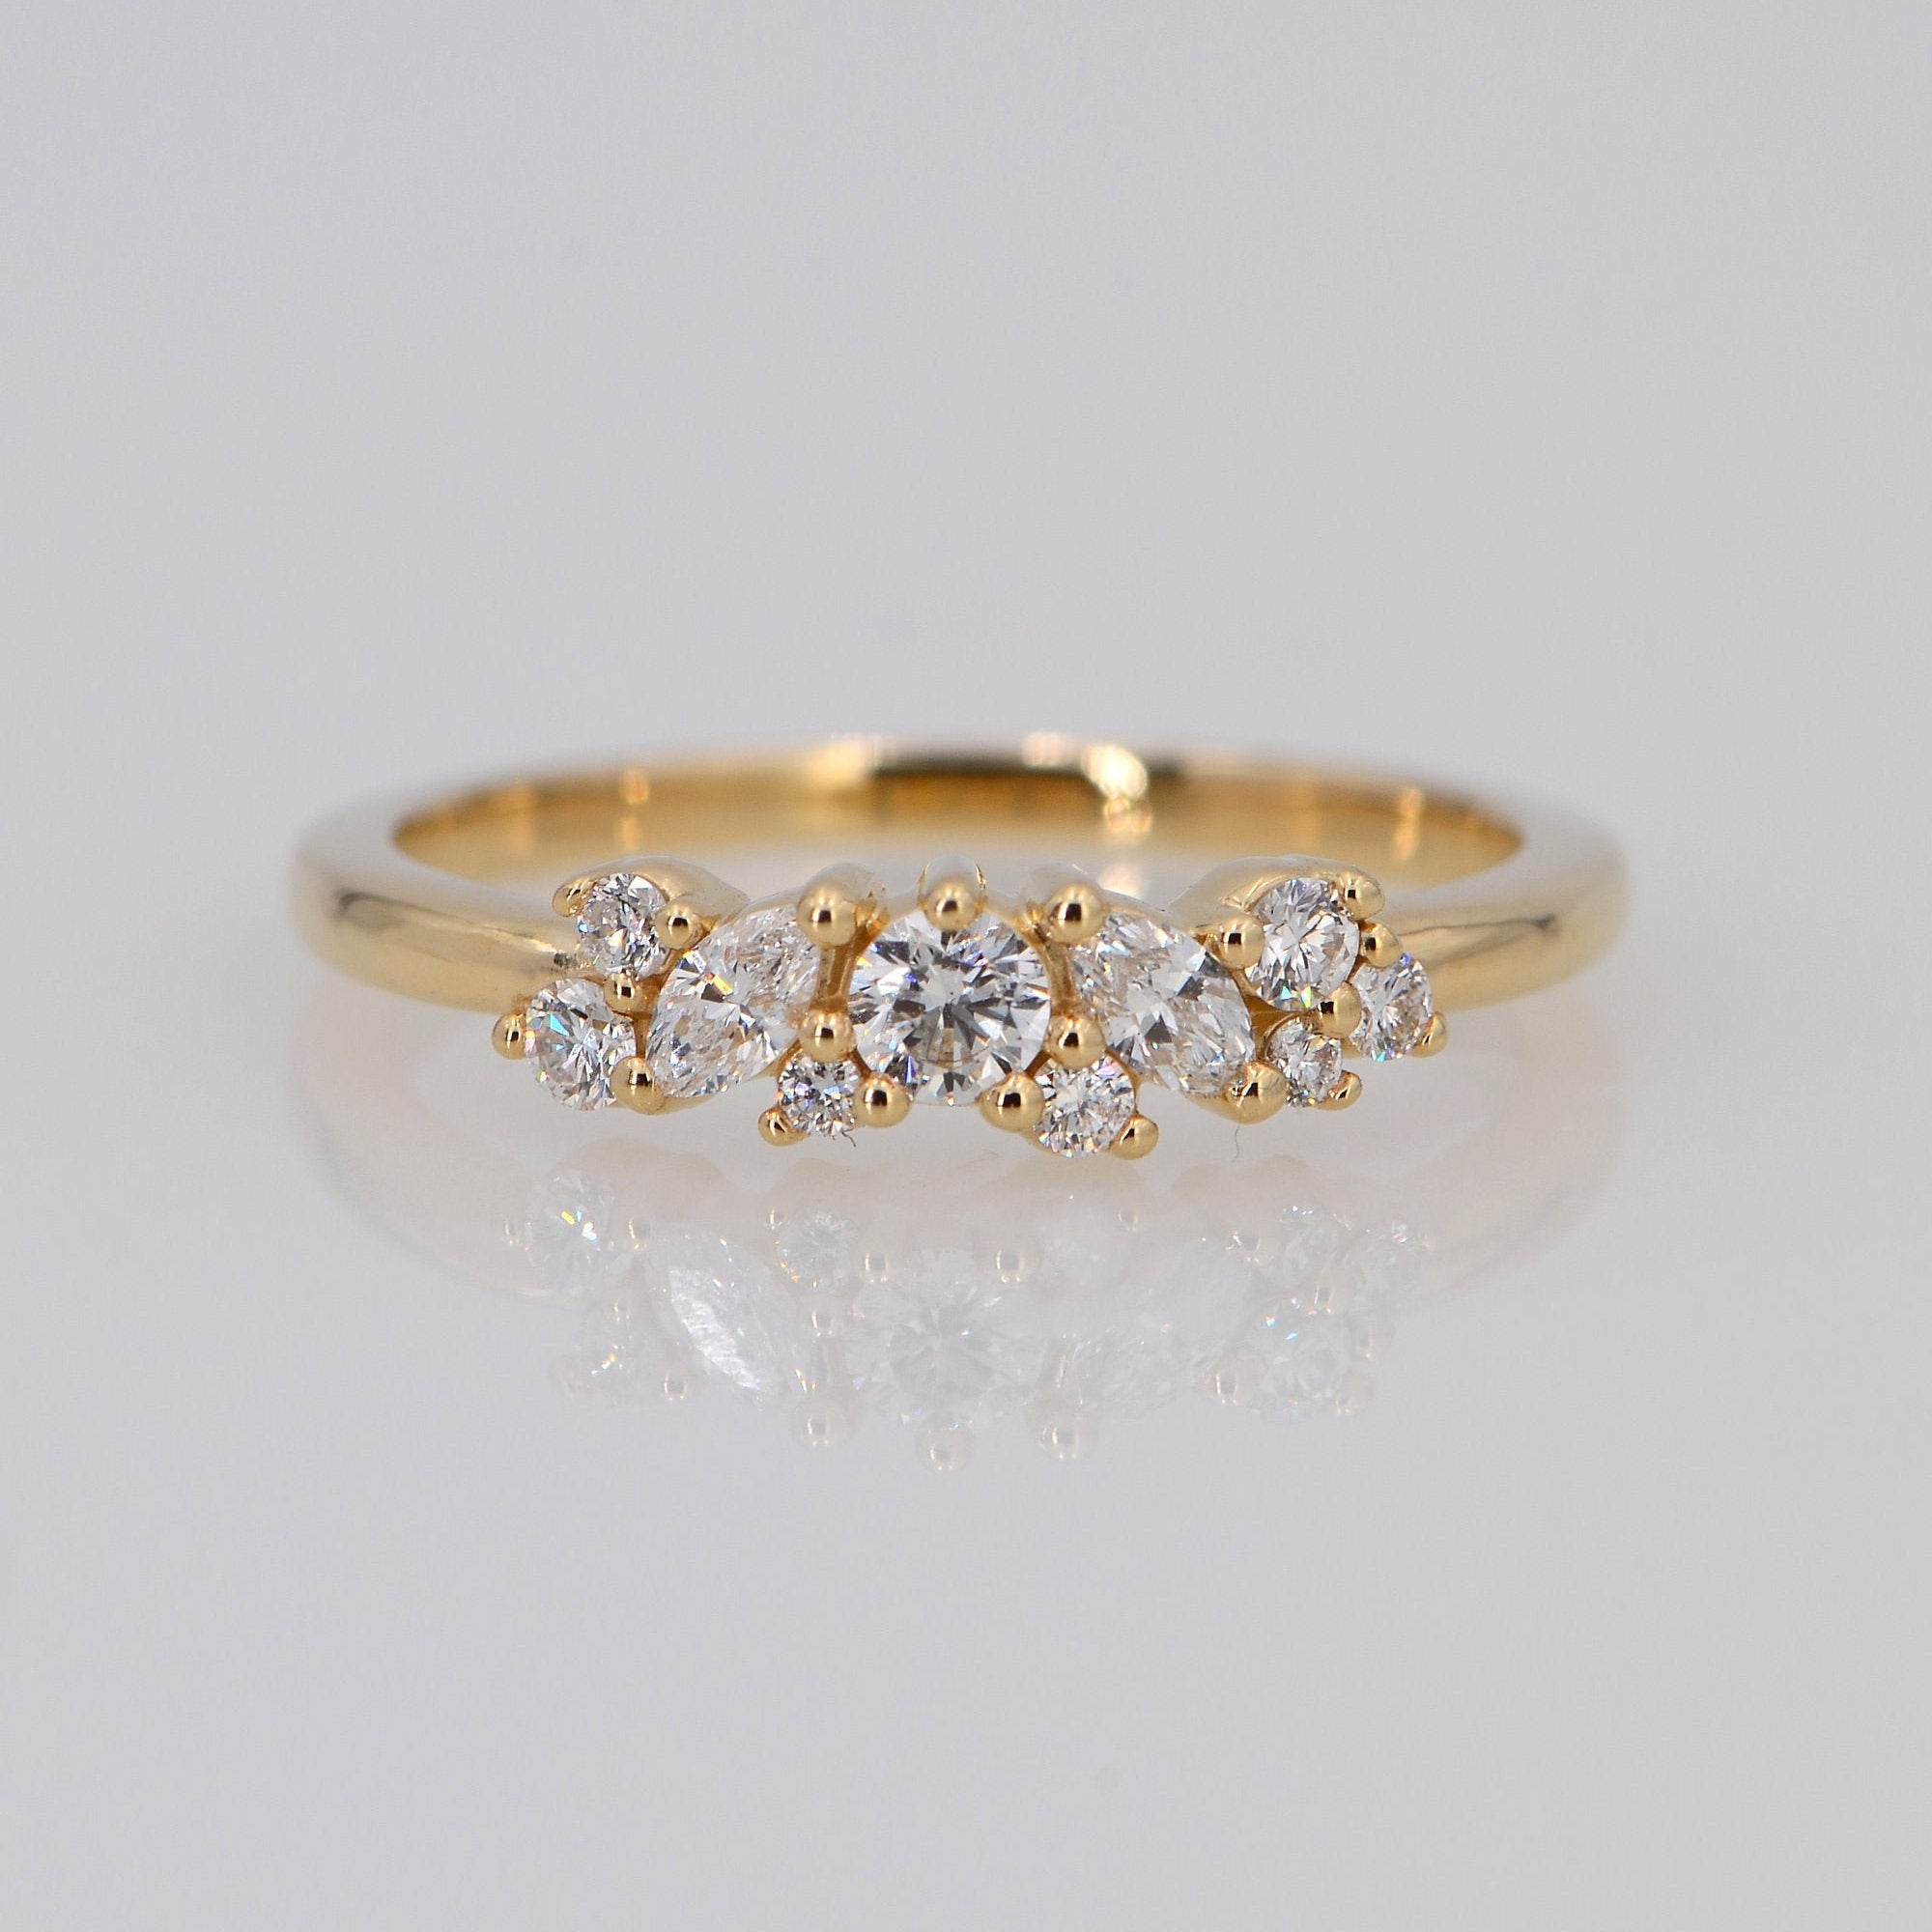 Delicate Diamond Ring, Solid Gold Minimalist Ring